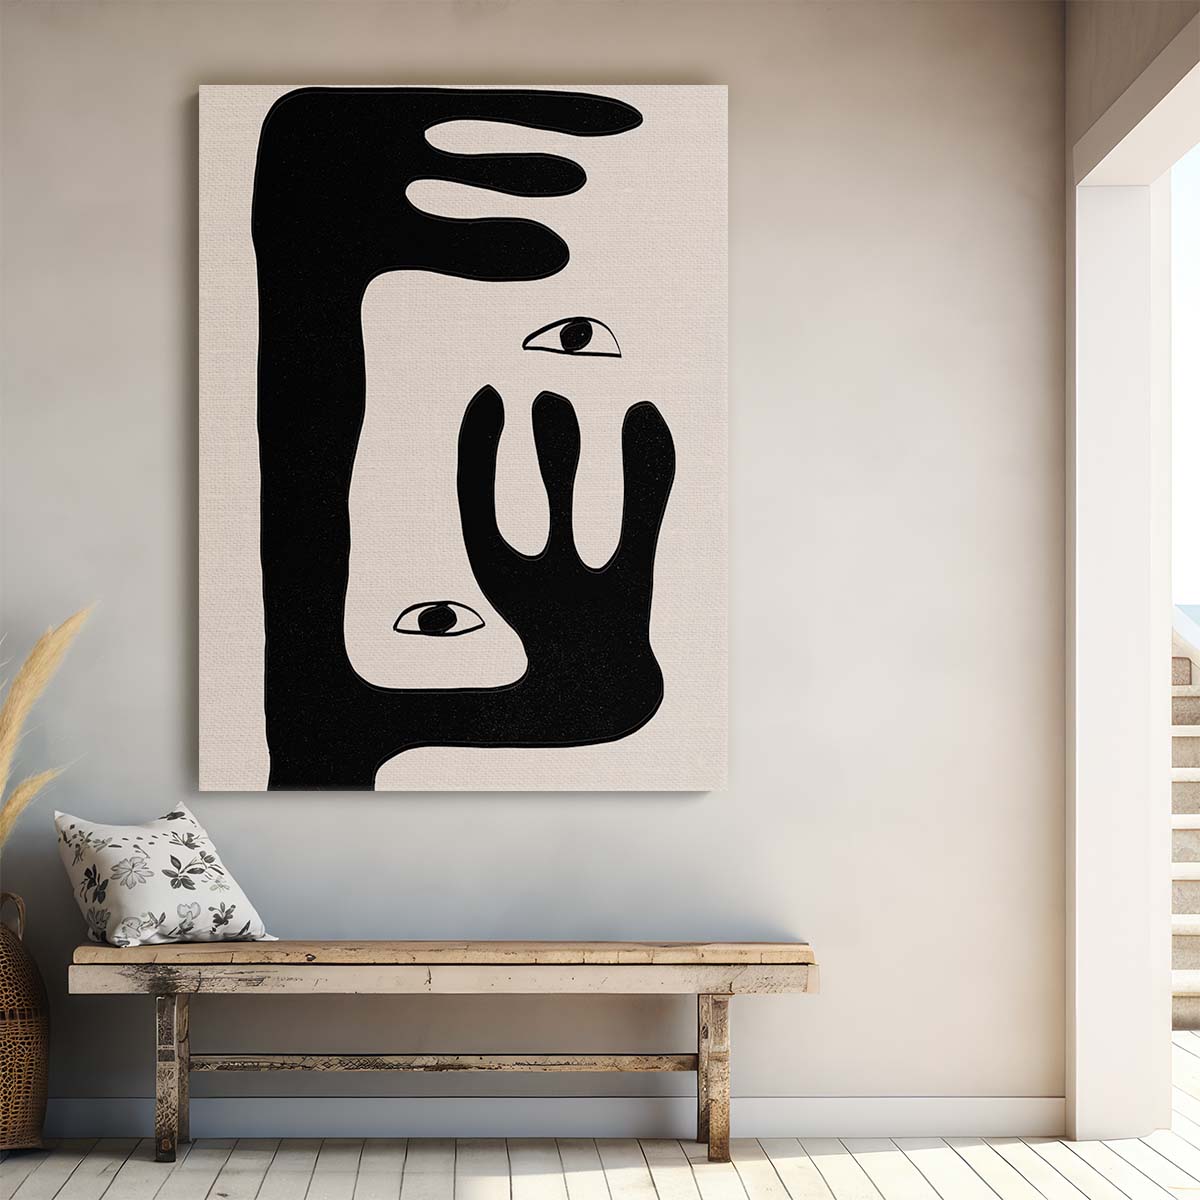 Abstract Eye & Hand Illustration, Beige Wall Art by MIUUS STUDIO by Luxuriance Designs, made in USA